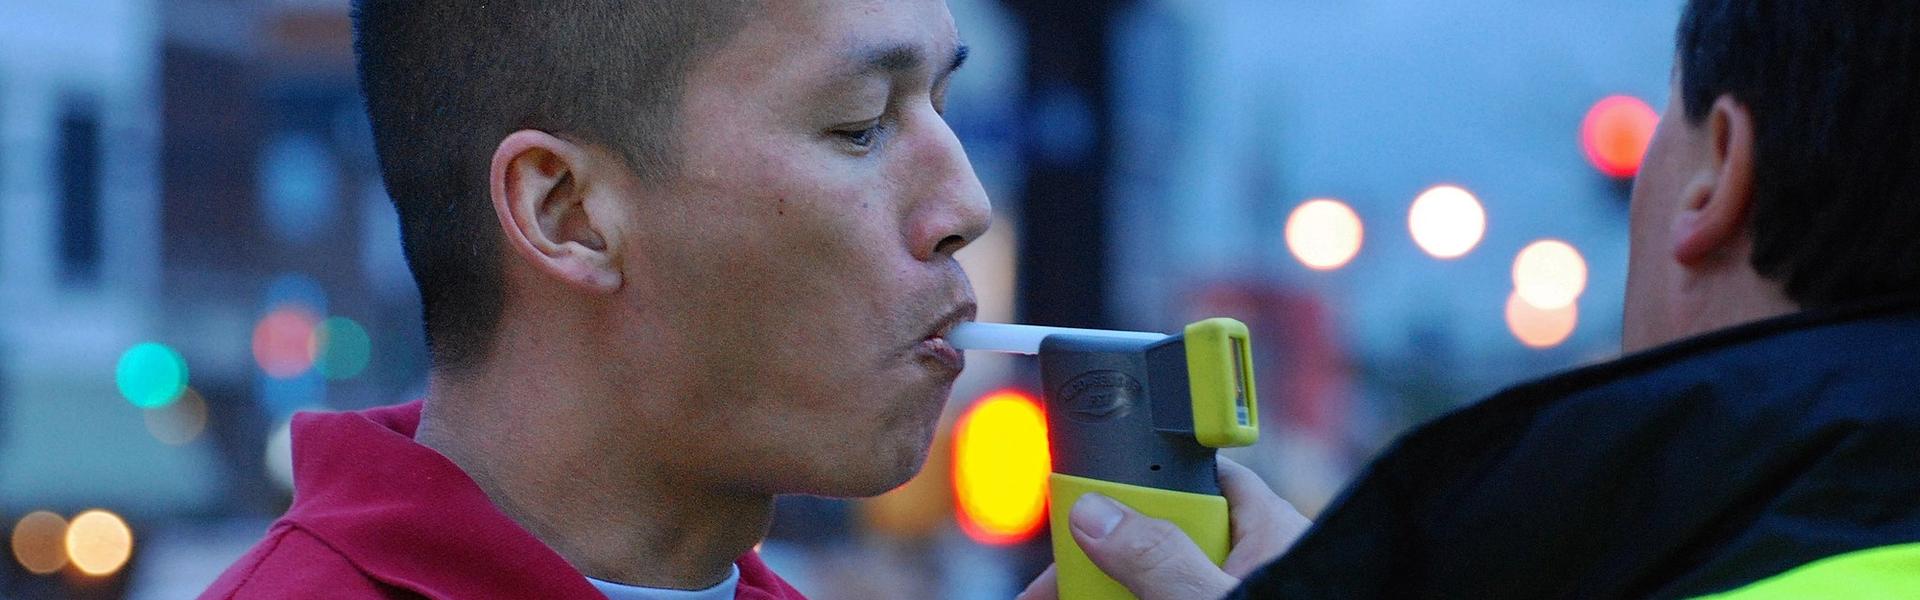 Is it bad advice to refuse a breathalyzer?